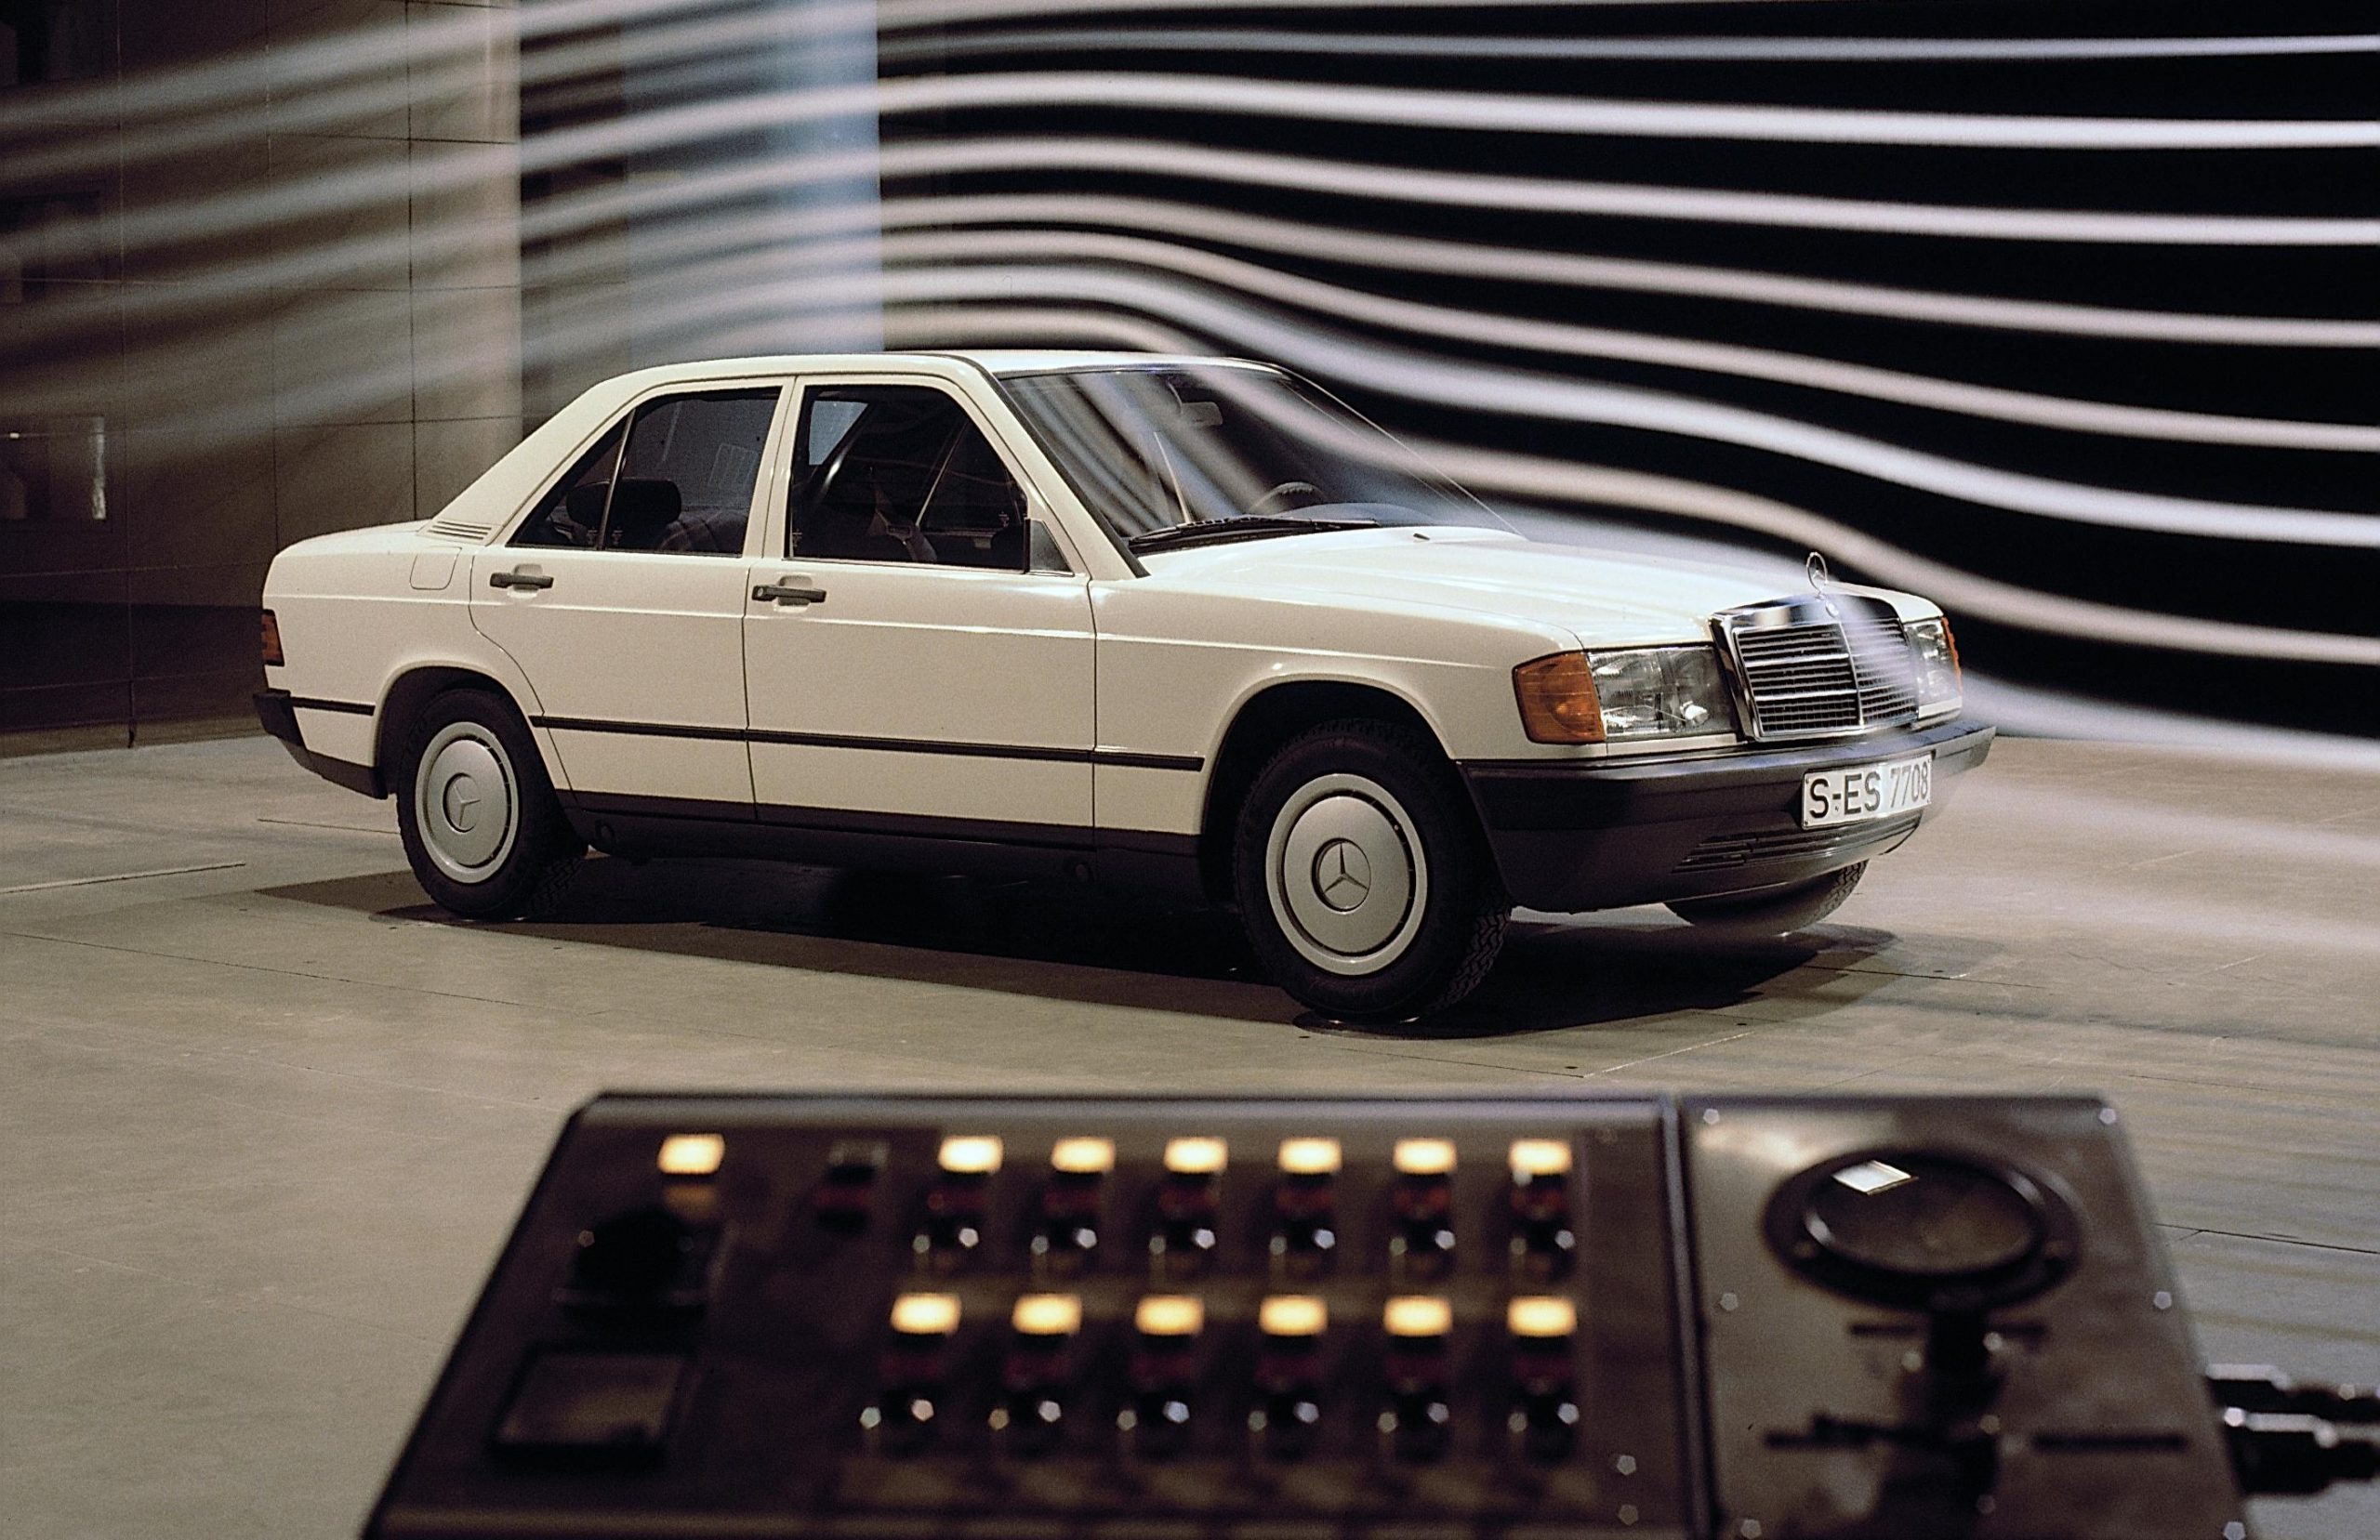 What you C is what you get: Five generations of Mercedes C-class